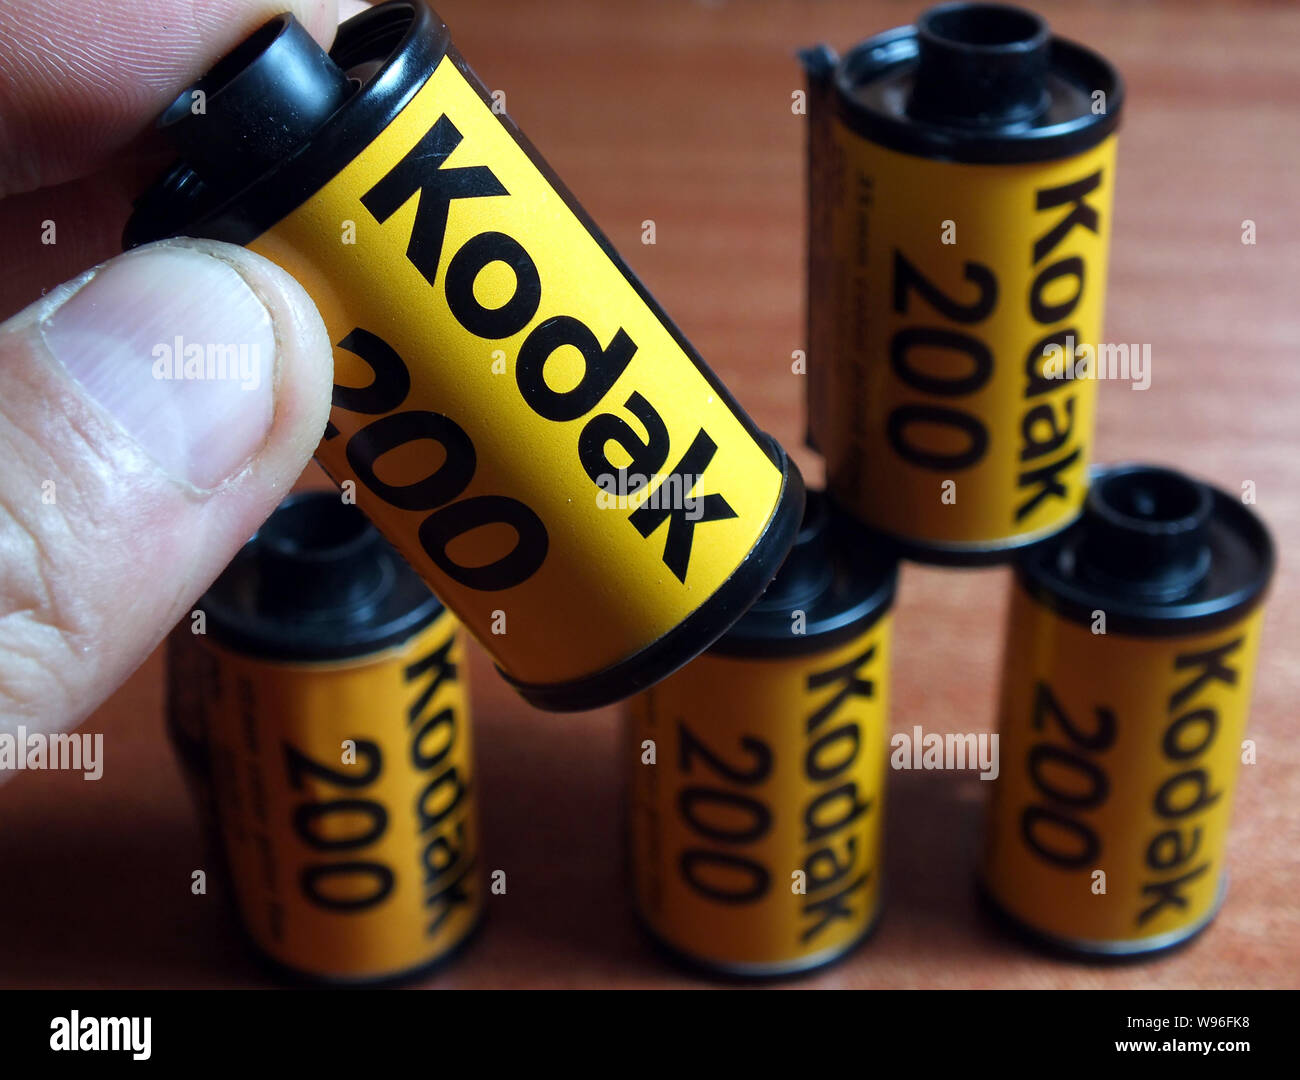 Empty Kodak film rolls are pictured at a photo printing shop in Yichang city, central Chinas Hubei province, 19 January 2012.   Eastman Kodak Co filed Stock Photo